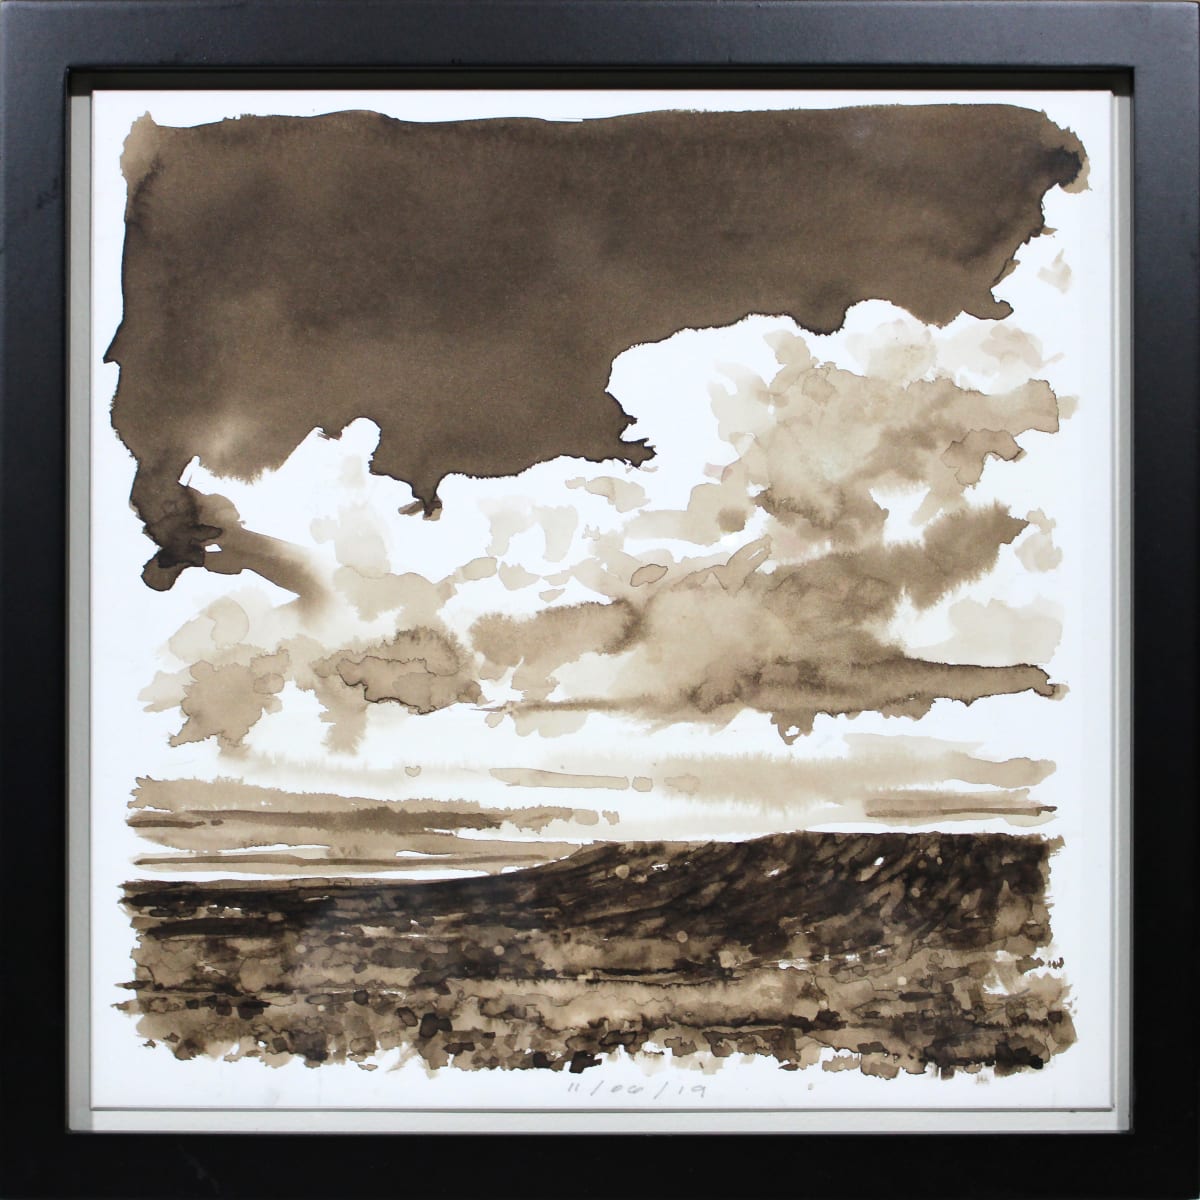 Walnut Ink  Series 11-06-19 by Baron Wilson  Image: West Texas Mesa with Storm Clouds black wood frame with glass